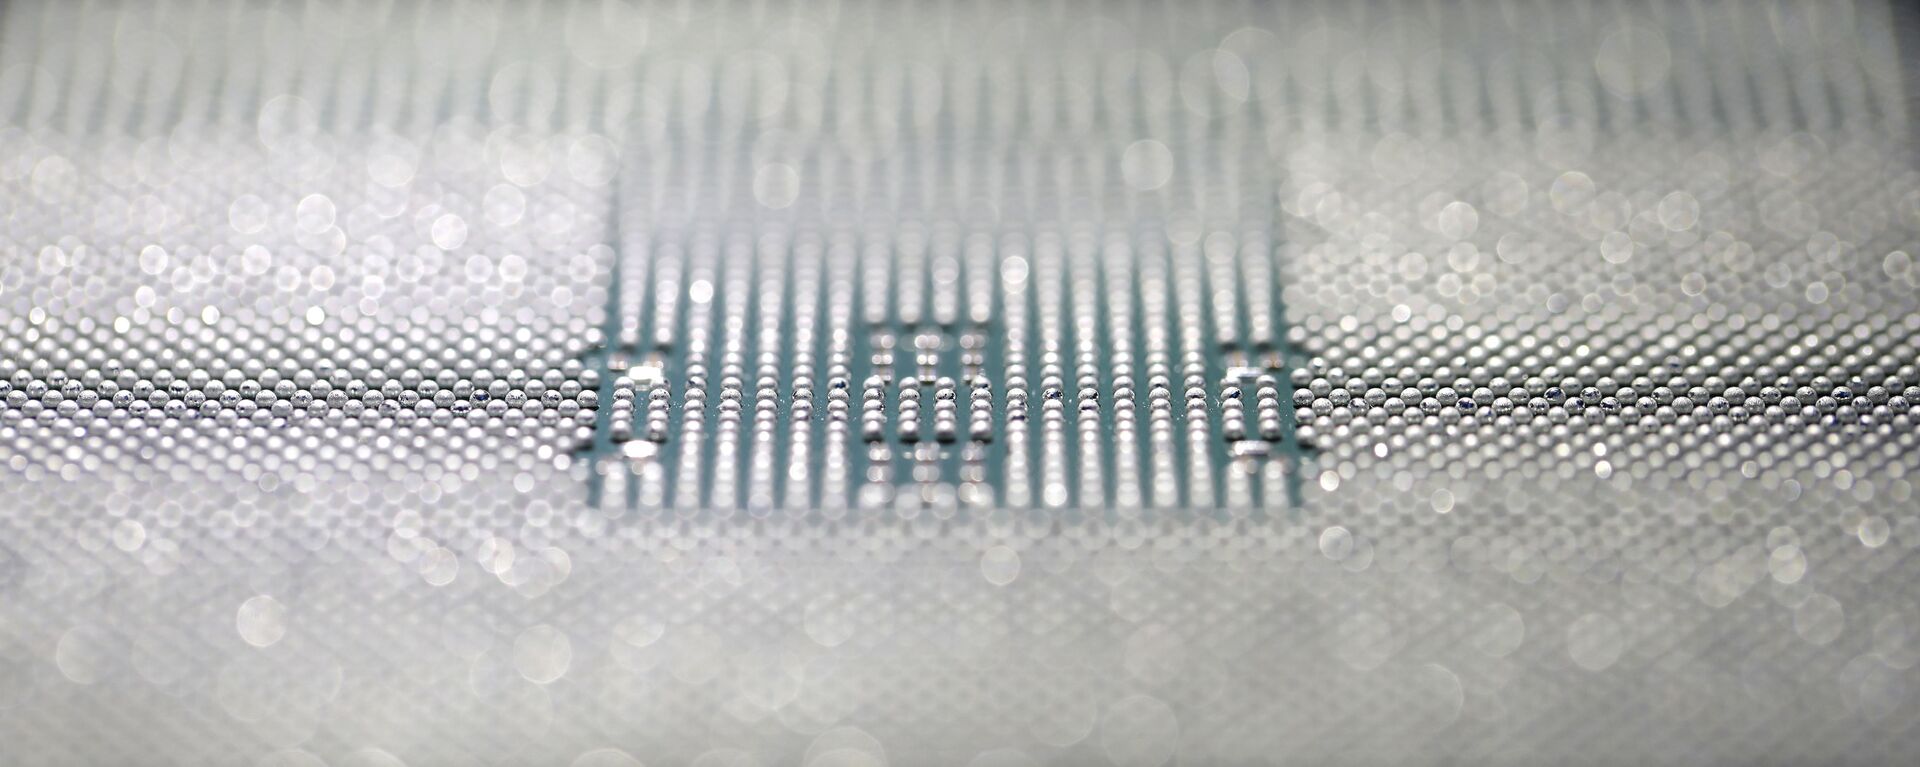 A Kunpeng 920 chip is displayed during an unveiling ceremony in Shenzhen, China, Monday, Jan. 7, 2019. Chinese telecom giant Huawei unveiled a processor chip for data centers and cloud computing as it expands into an emerging global market despite Western warnings the company might be a security risk.  - Sputnik International, 1920, 04.04.2023